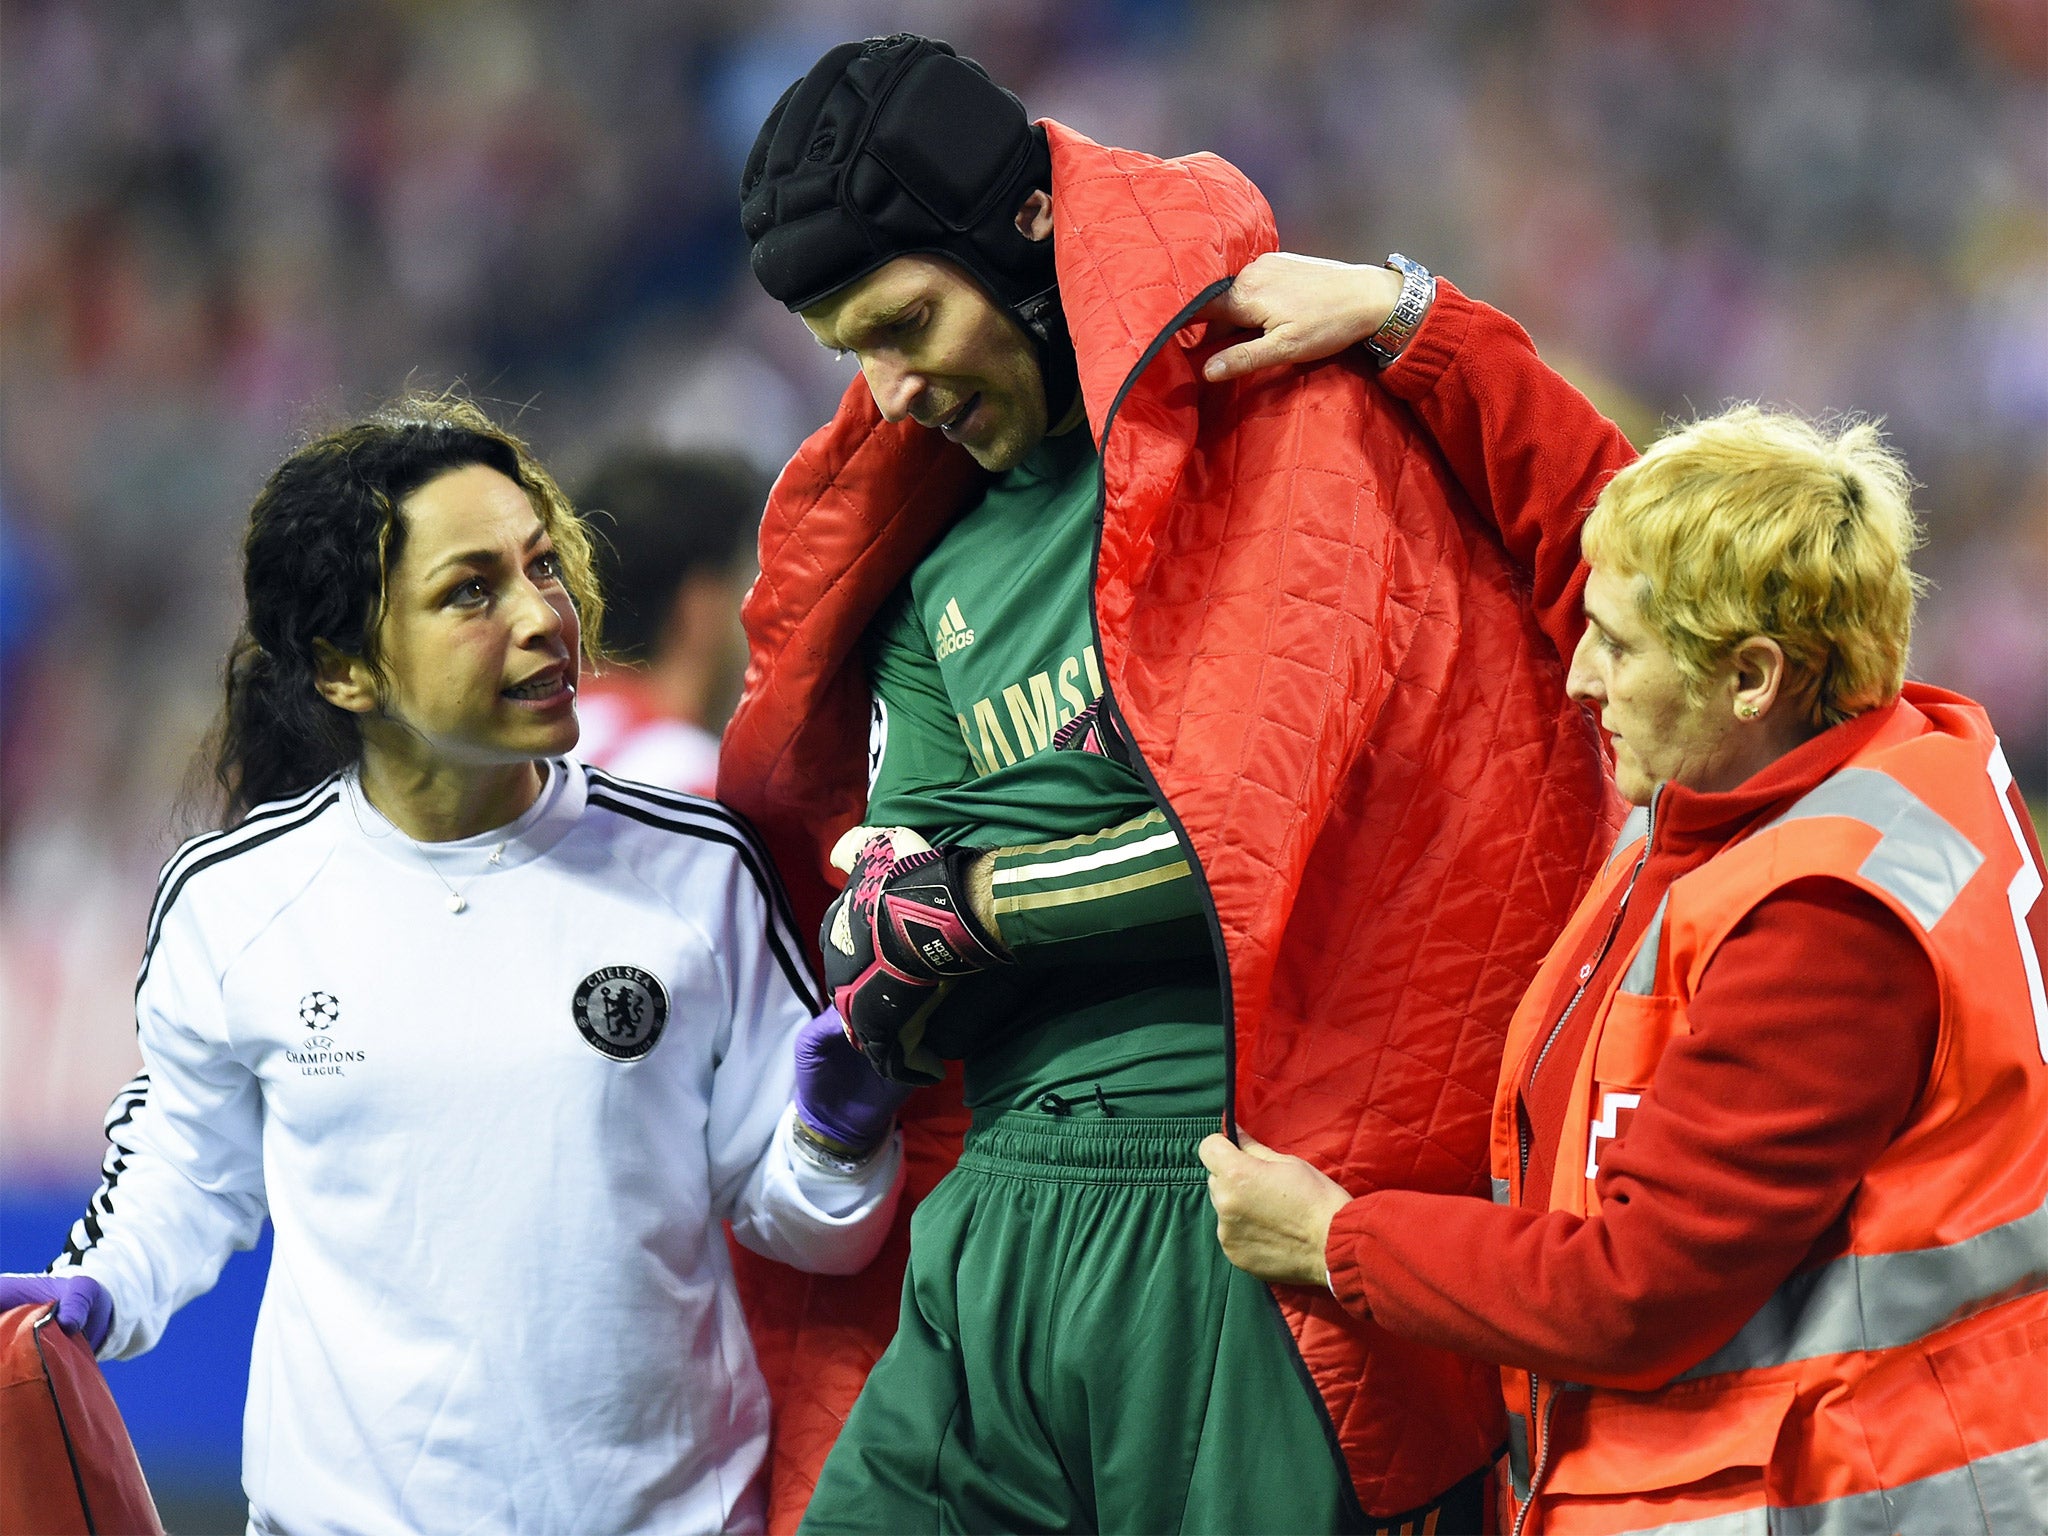 Chelsea’s goalkeeper Petr Cech is helped from the pitch by team doctor Eva Carneiro (left) last year after he was injured against Atletico Madrid